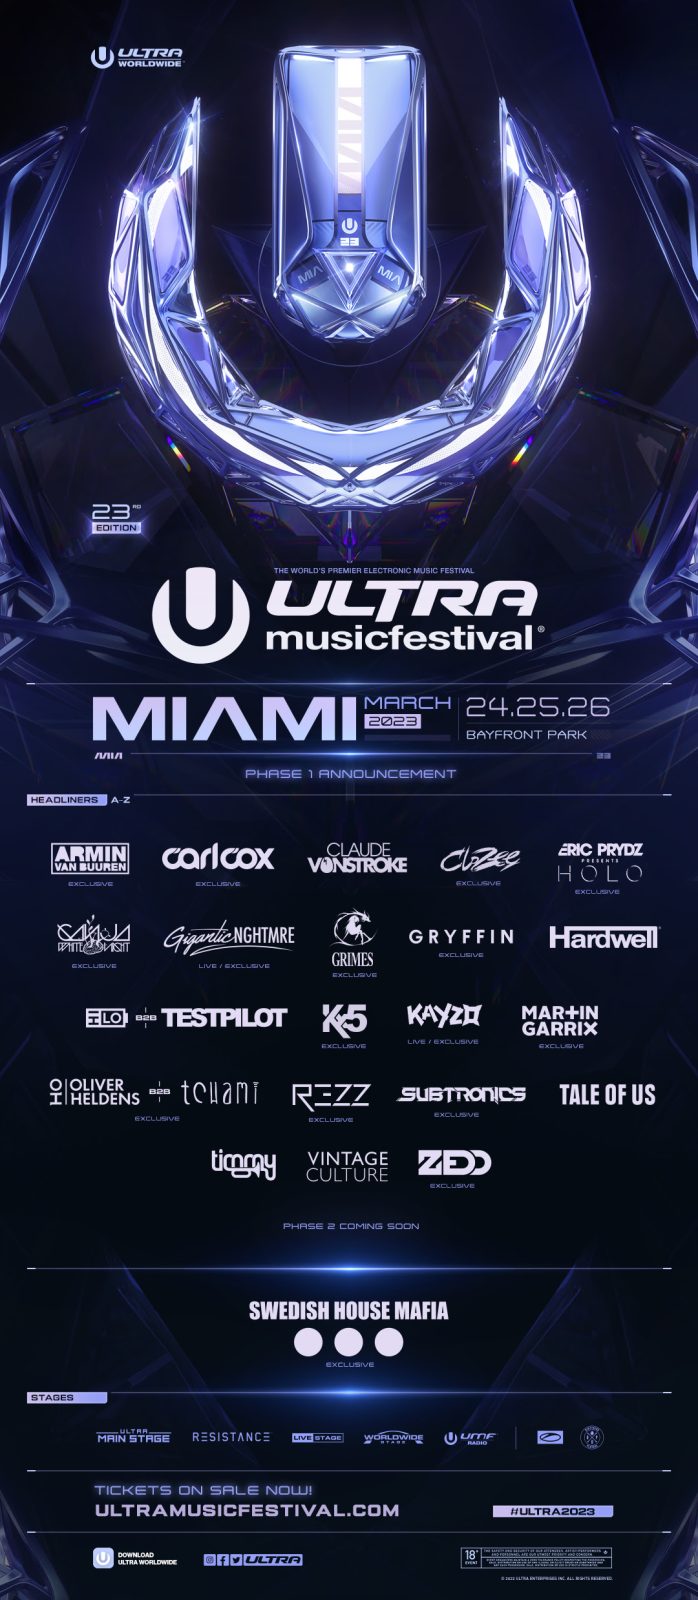 Ultra Music Festival unveils star-studded Phase 1 lineup for 23rd edition, taking place Friday, March 24 - Sunday, March 26, 2023 at longtime home of Bayfront Park